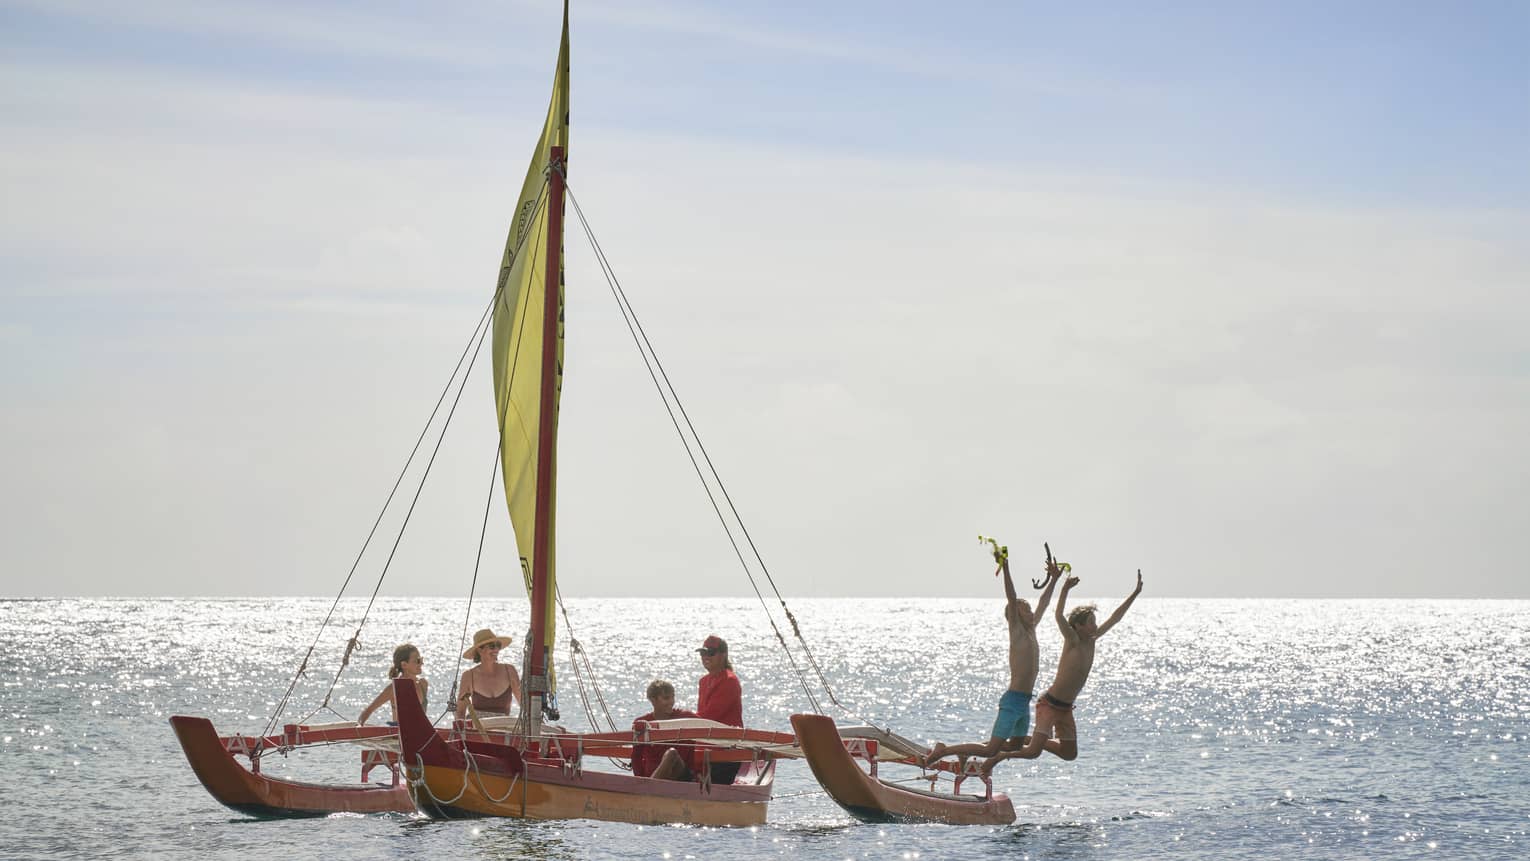 A family floats on an outrigger canoe as two people jump off the boat into the water